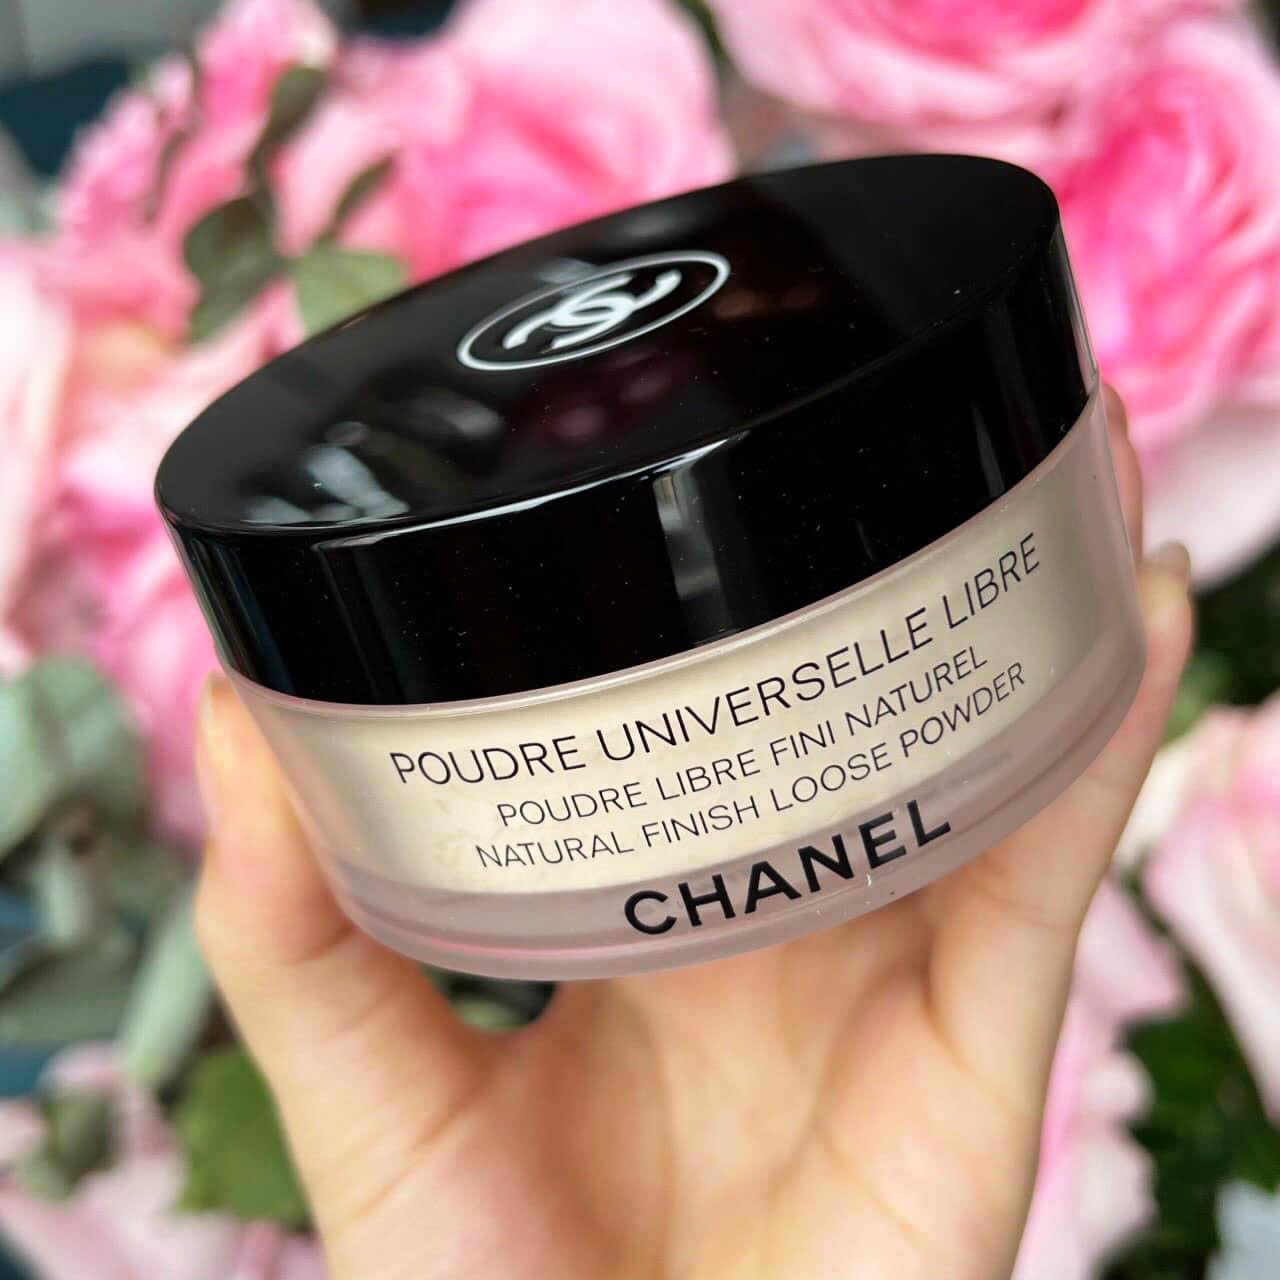 Chanel Phấn Phủ Bột Poudre Universelle Libre Natural Finish Loose Powder Tone 20 Clair